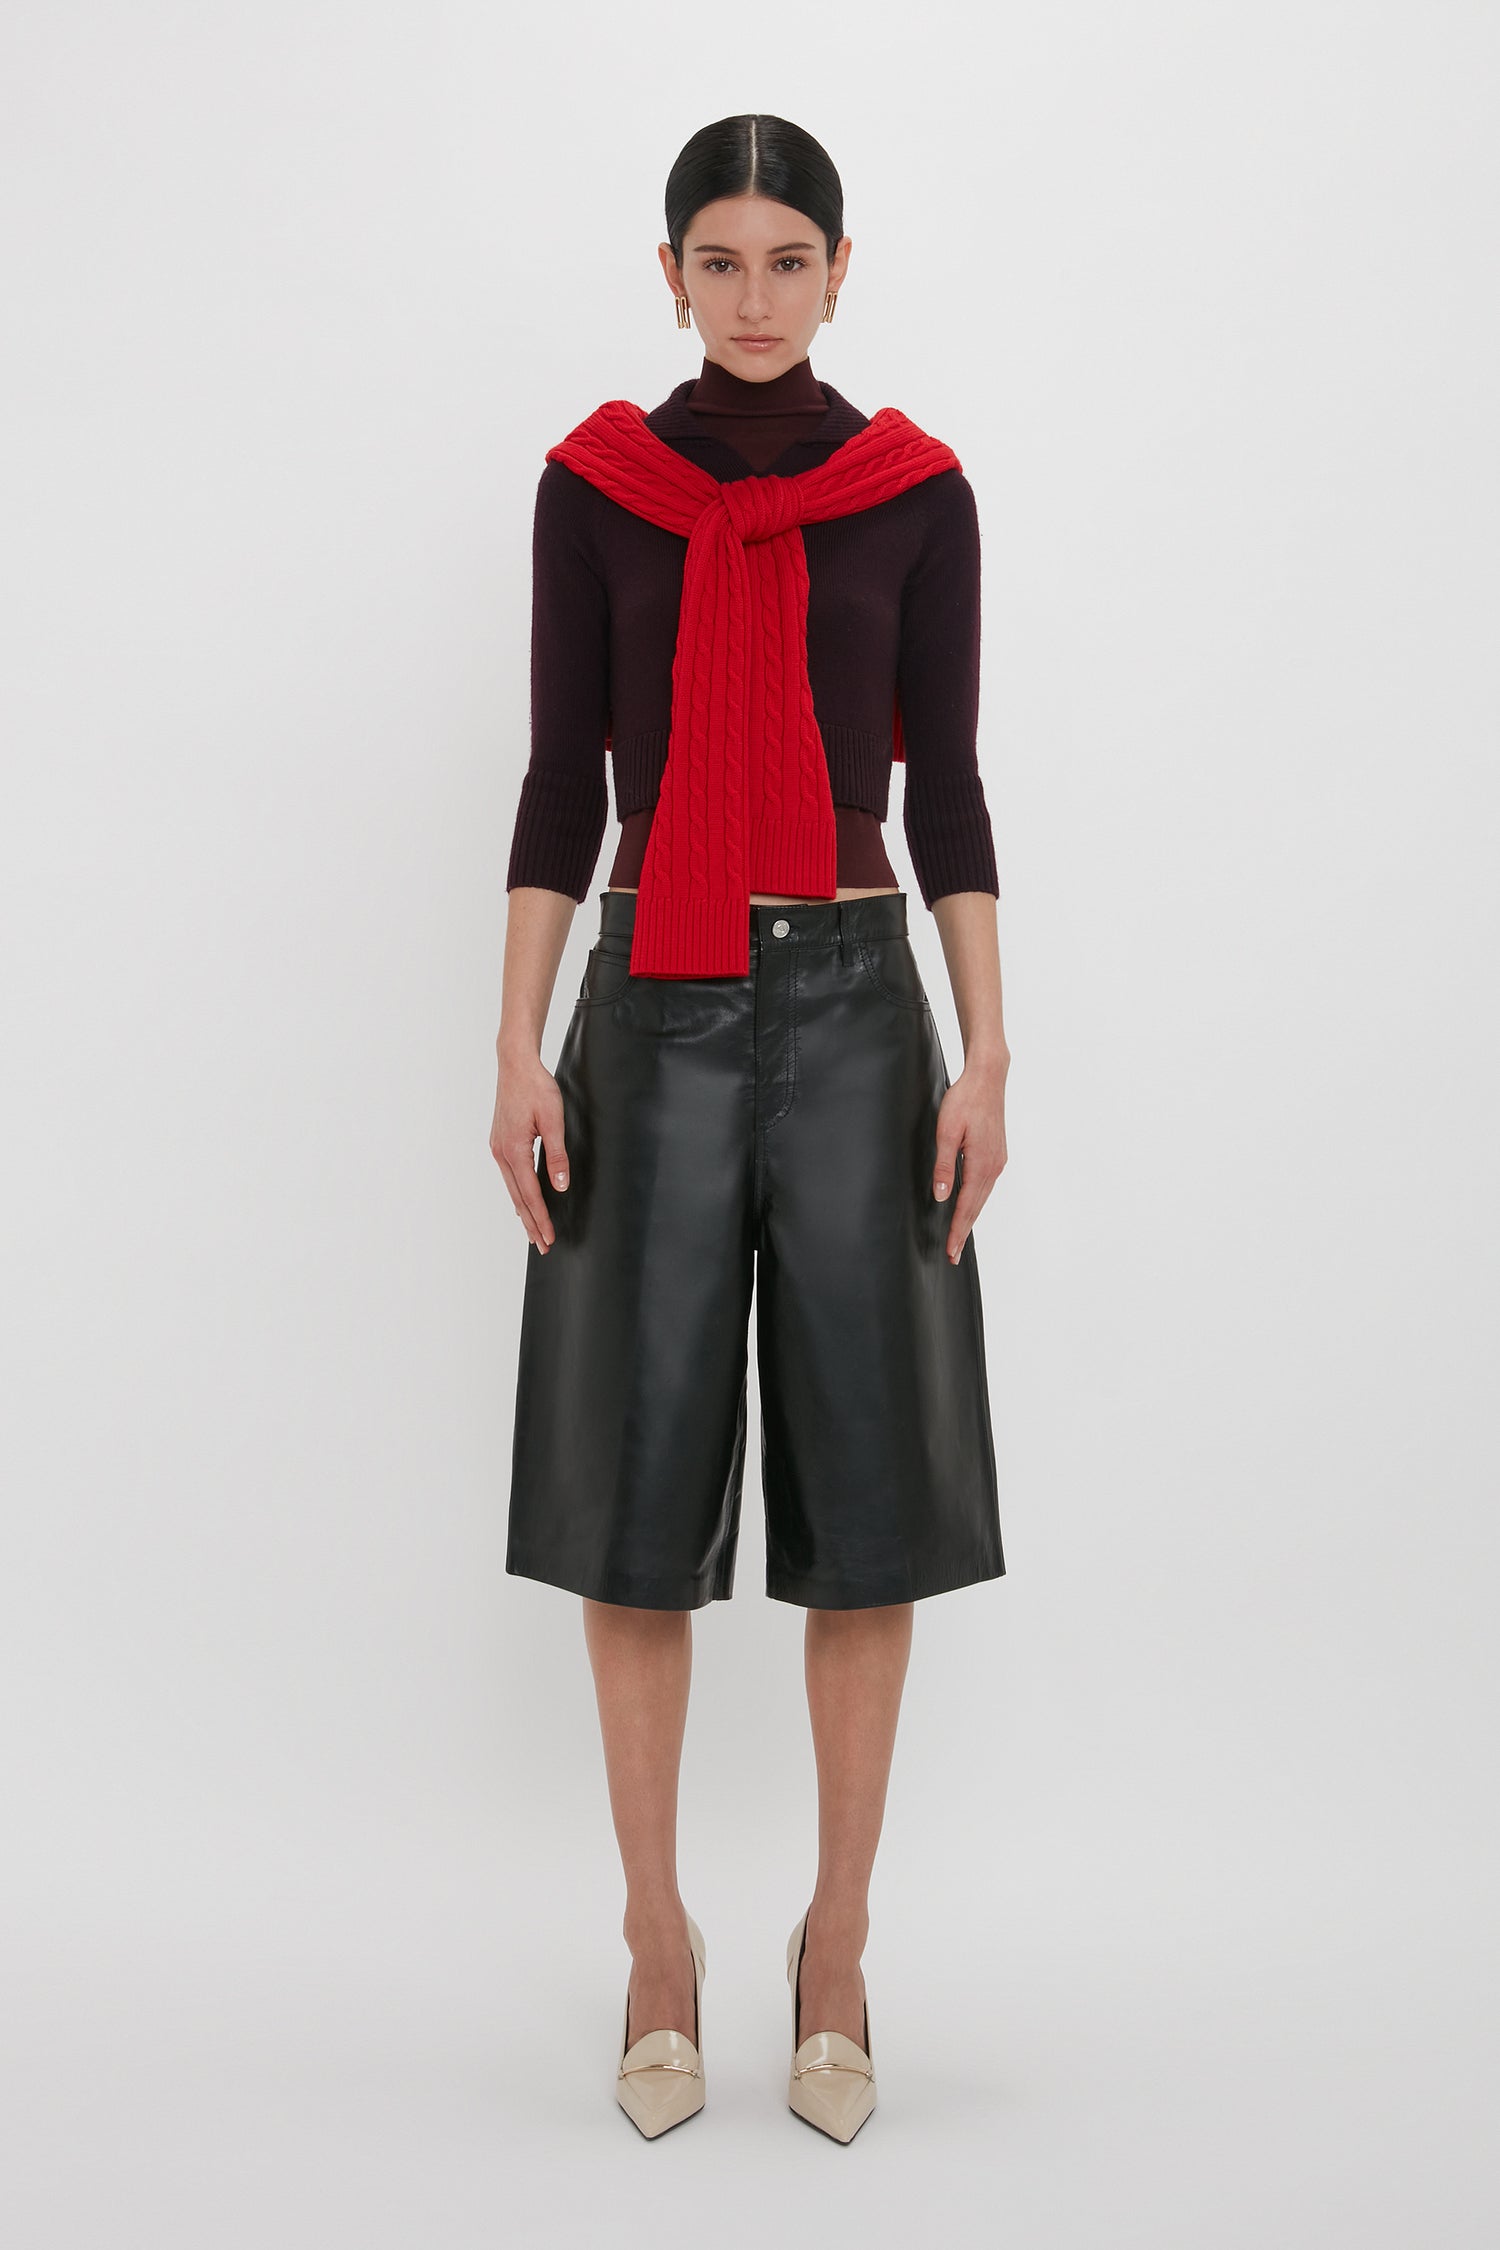 A person stands against a white background wearing a red sweater around their neck, a dark shirt, Victoria Beckham's Leather Bermuda Short In Black, and beige pointed shoes.